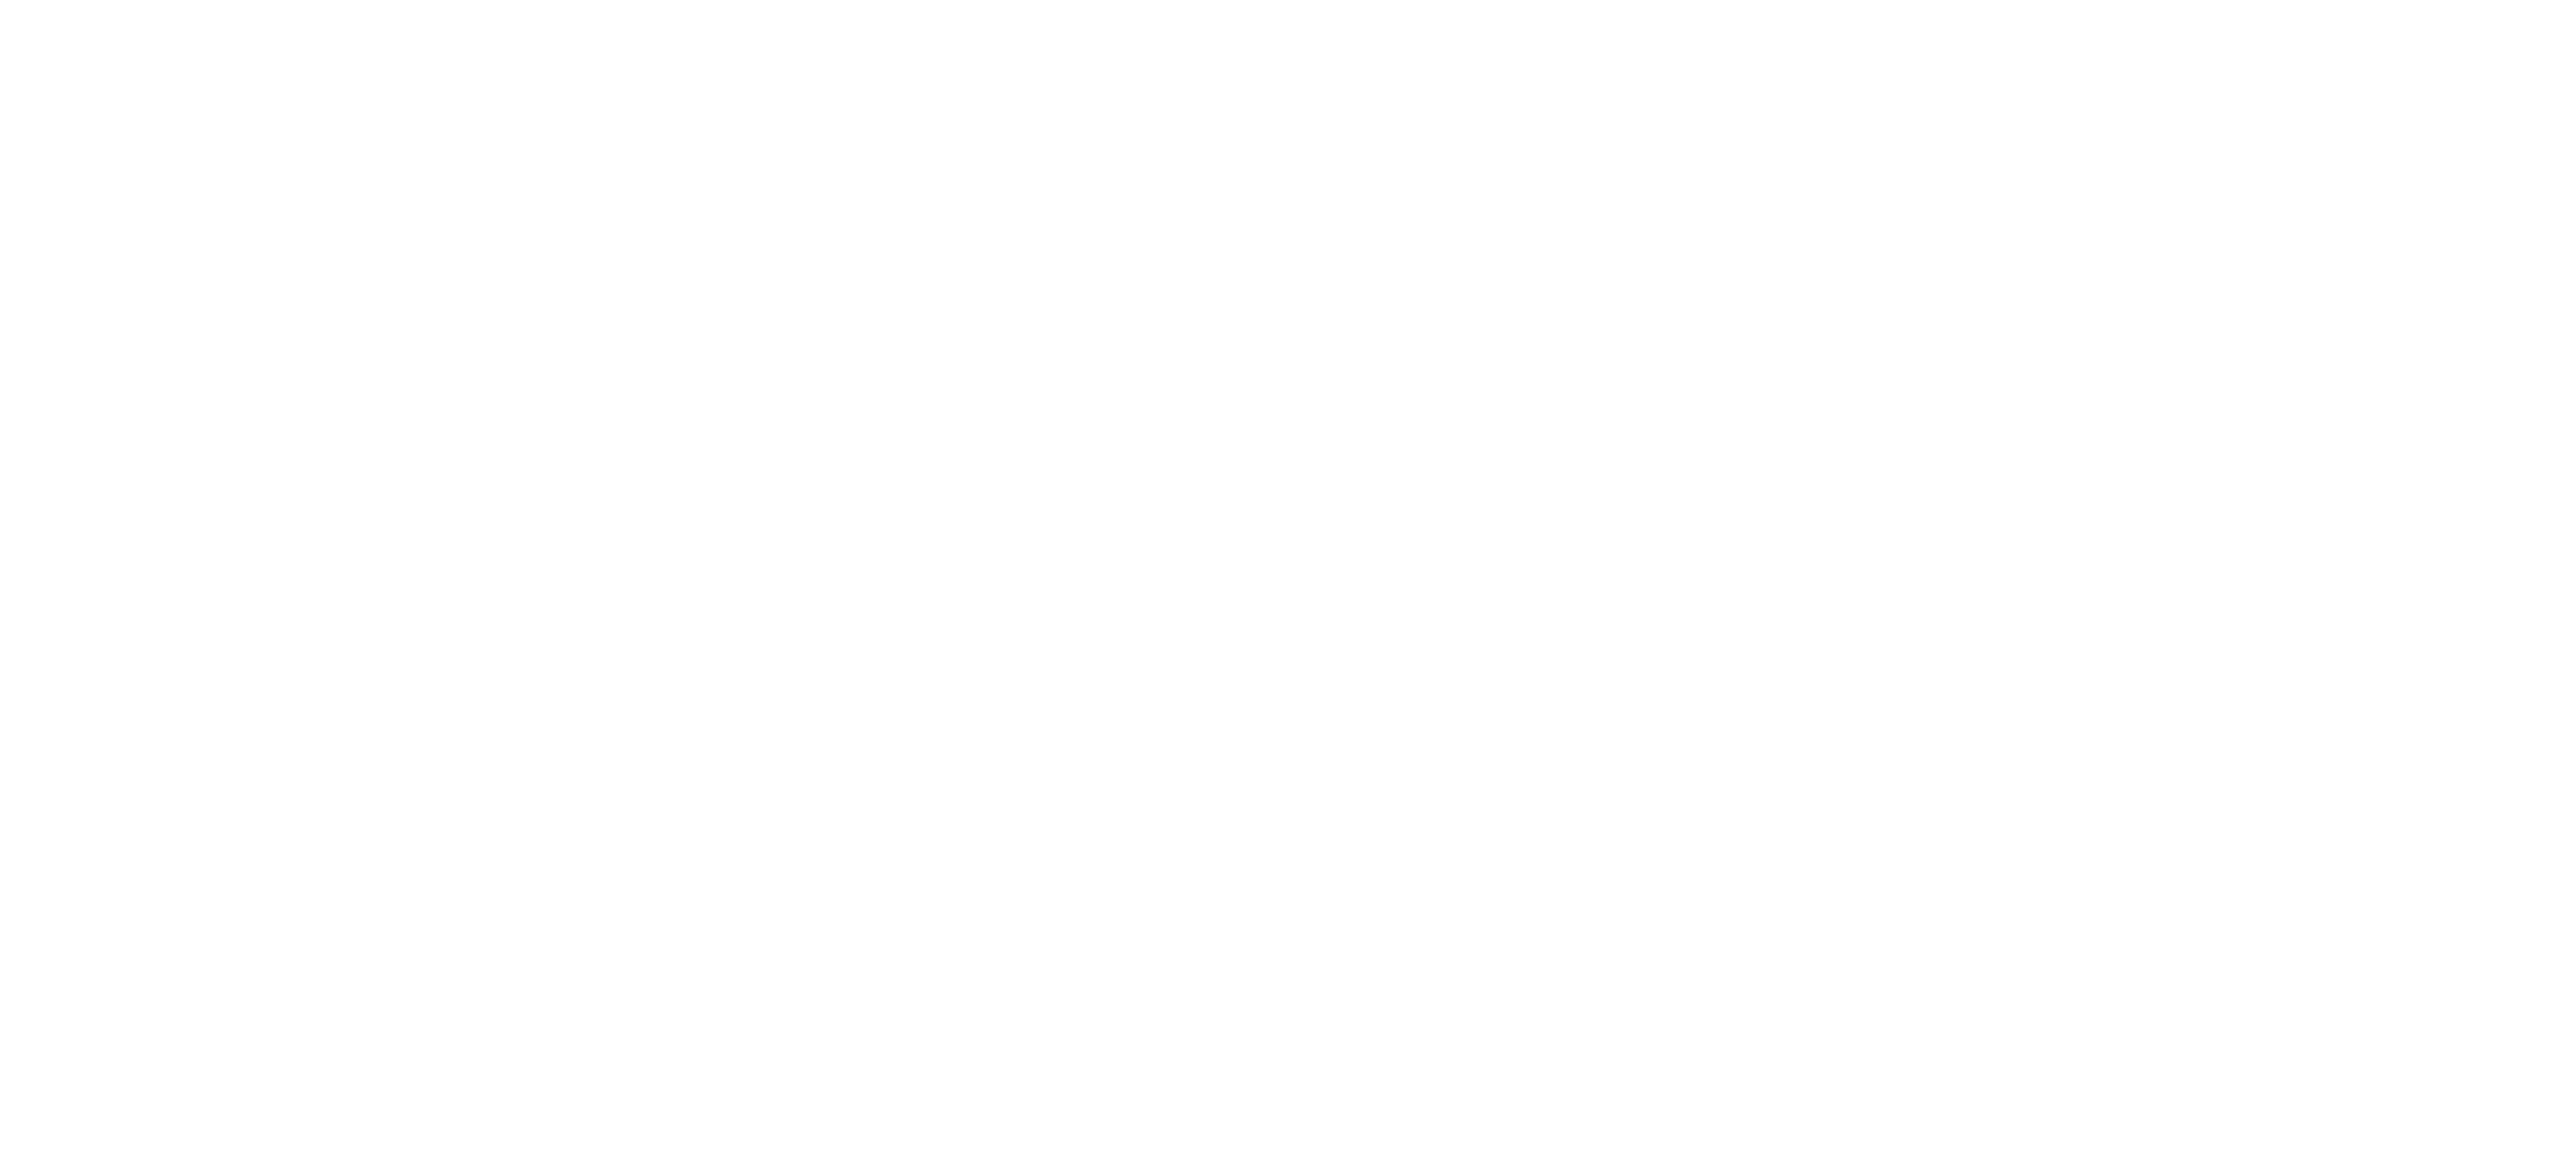 Carbon-Free Europe: A Technology-Inclusive Climate Initiative